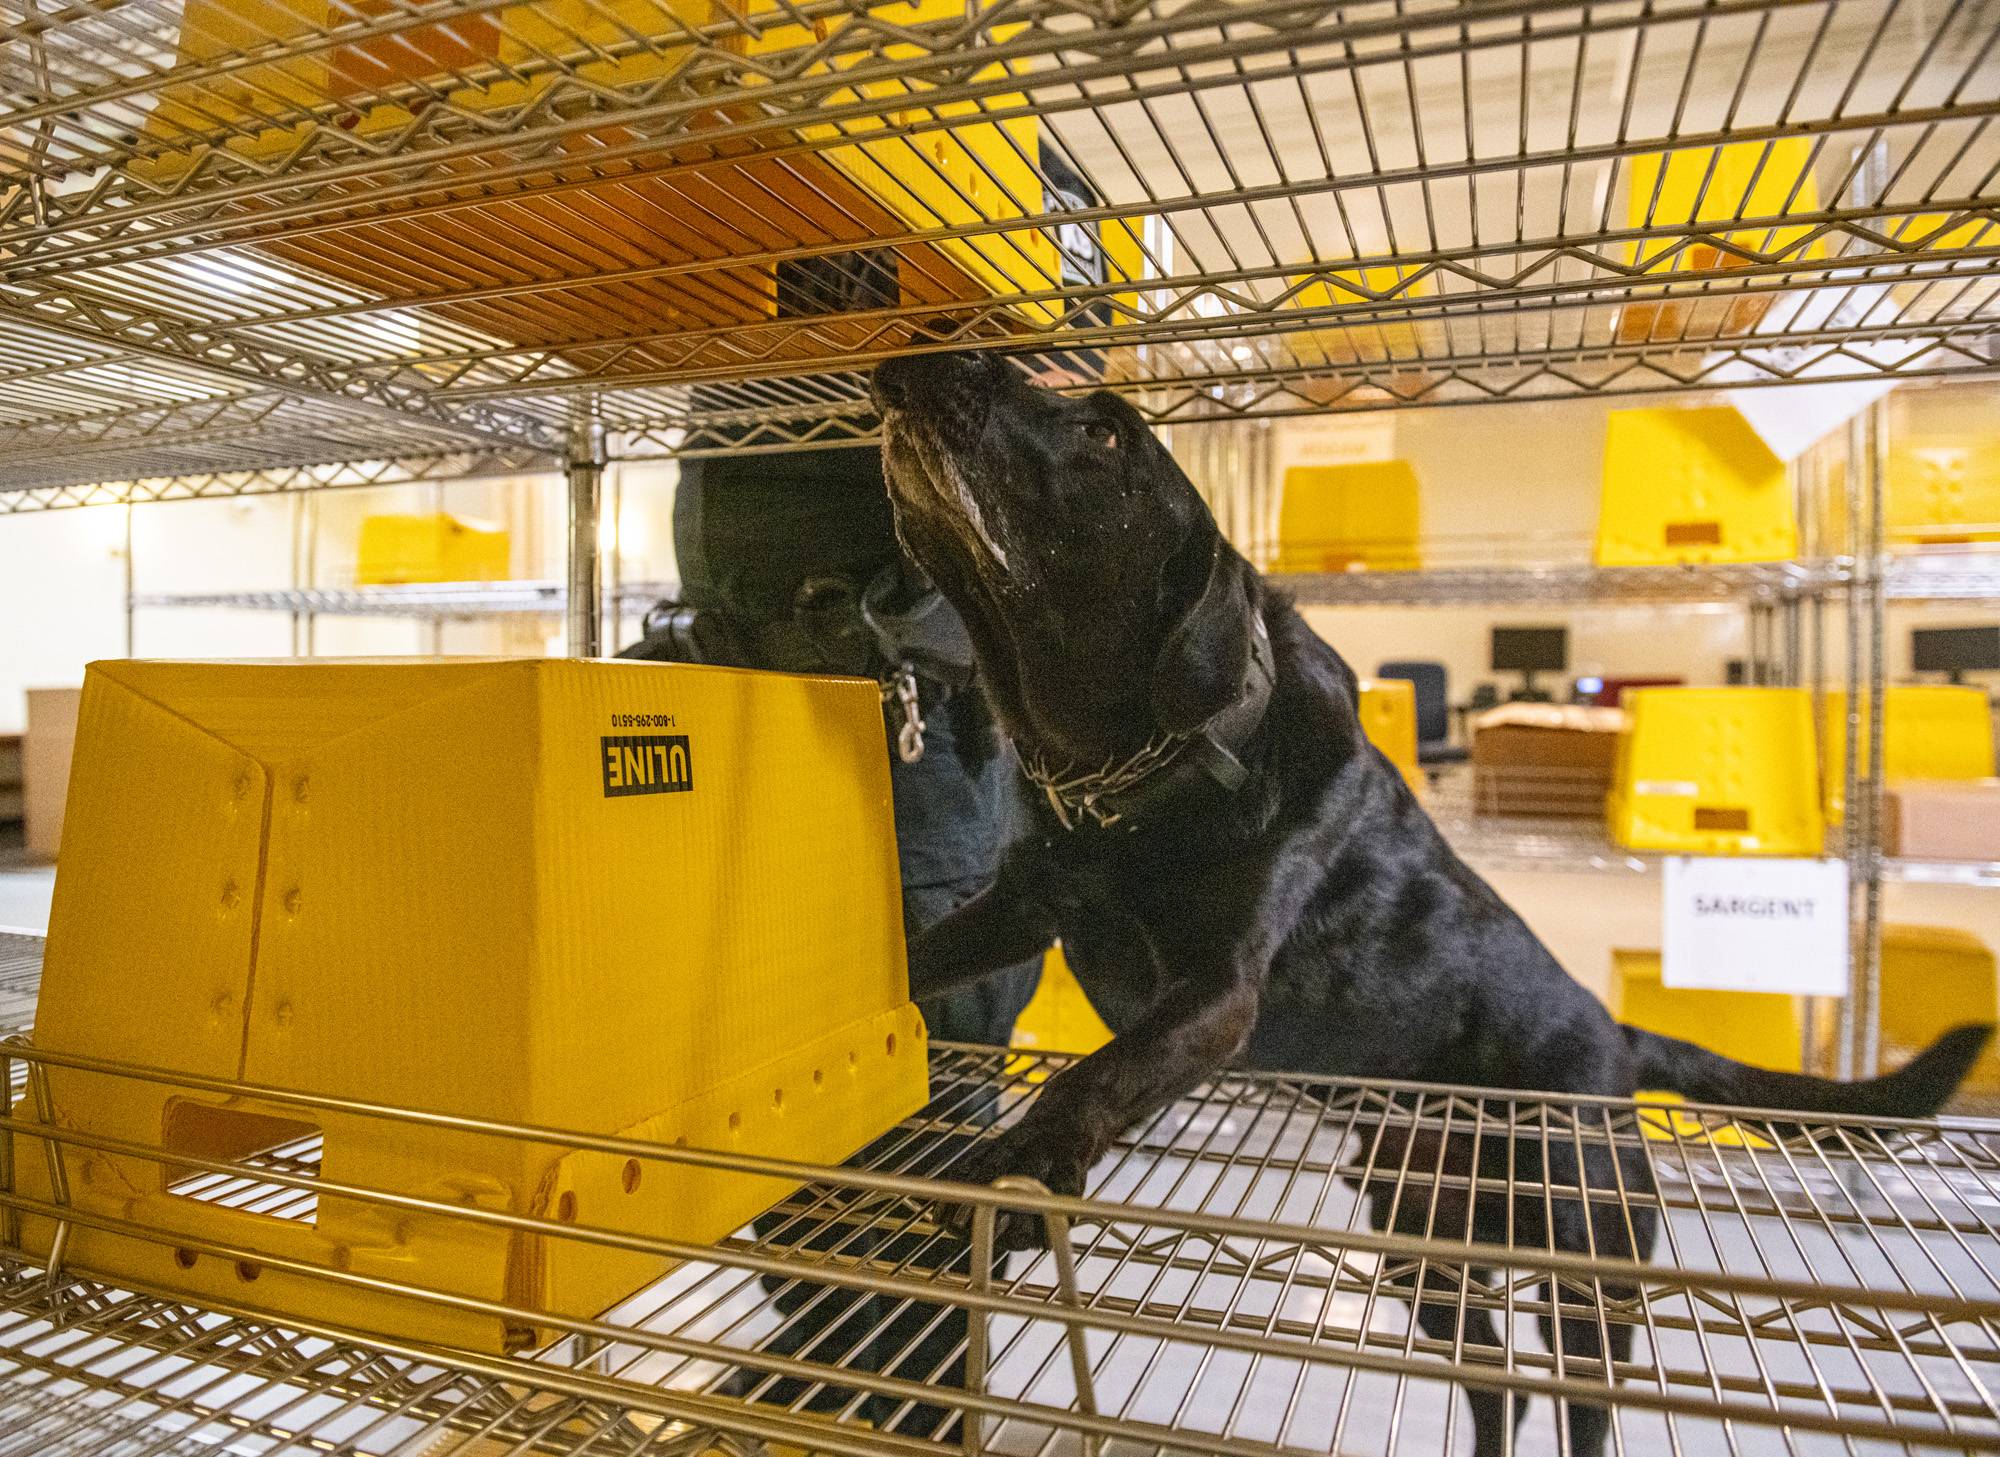 “What a good boy!  Canine officers regularly check mailrooms on campus, making sure packages are safe. 